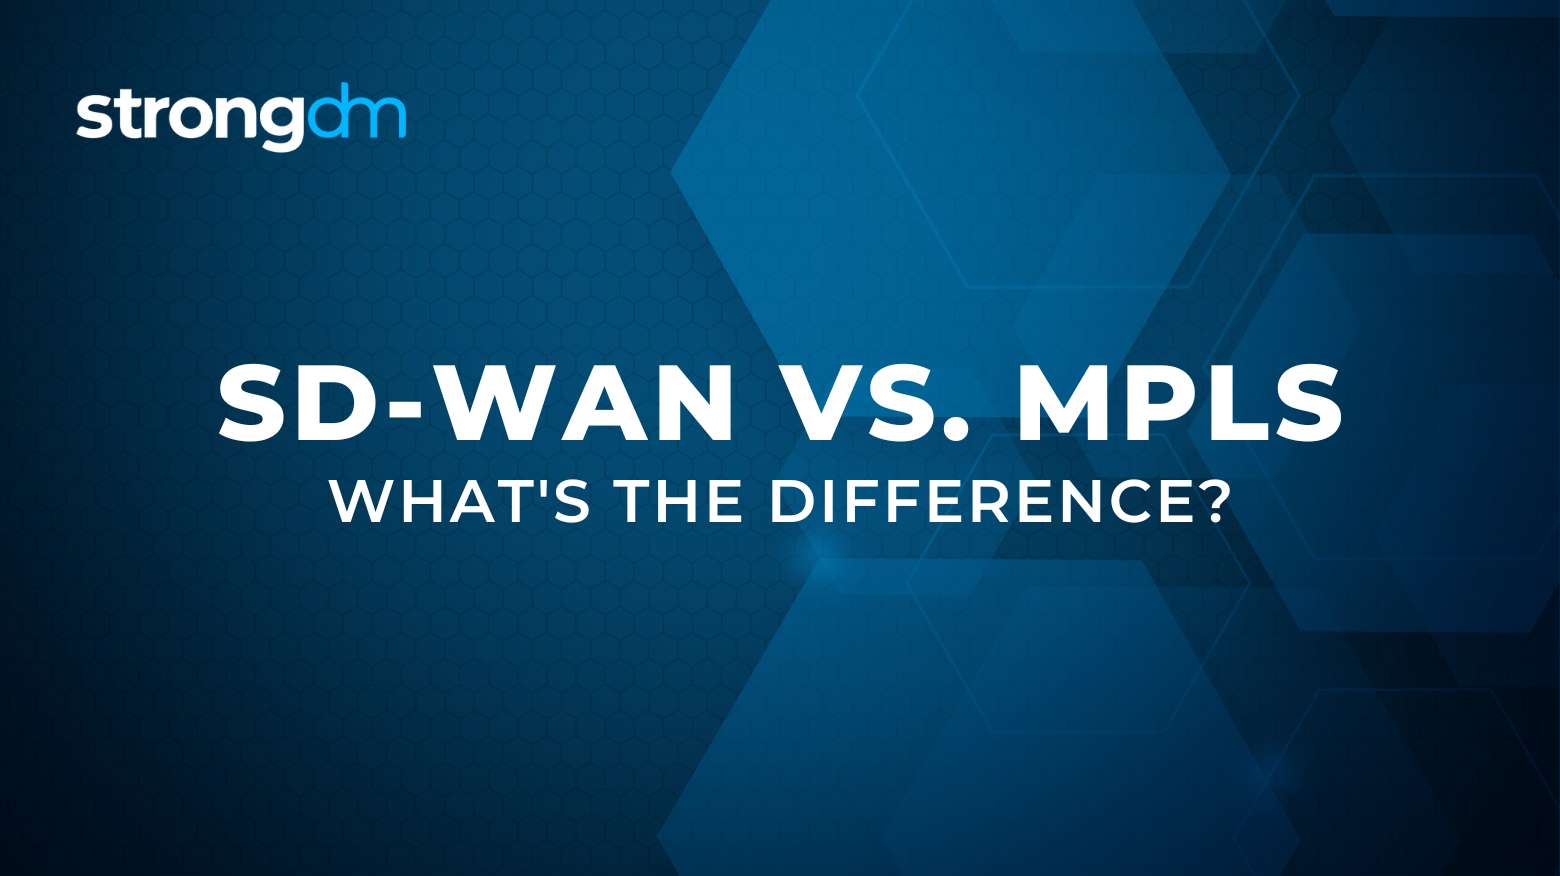 SD-WAN vs. MPLS: What's the Difference?